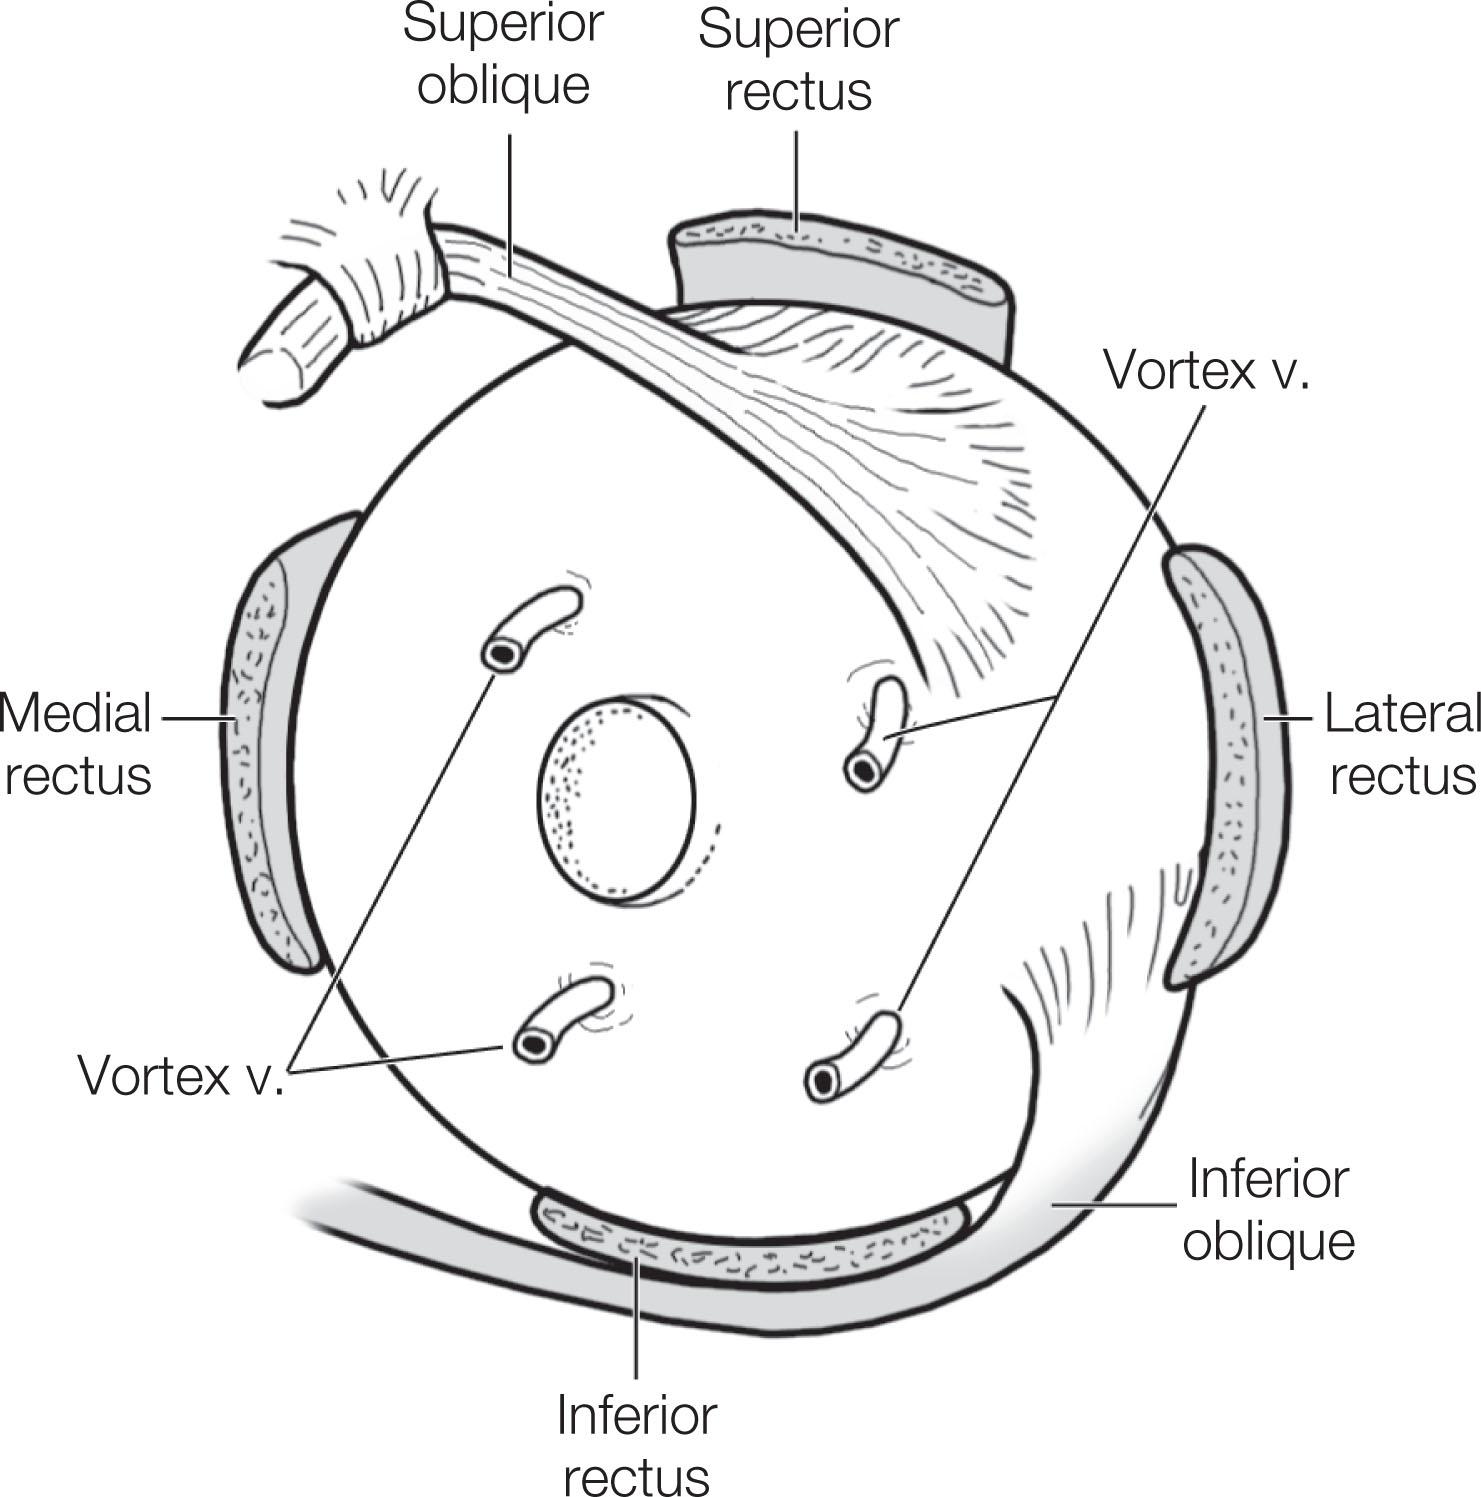 Fig. 88.6, Vortex veins as seen from the posterior aspect of the globe.